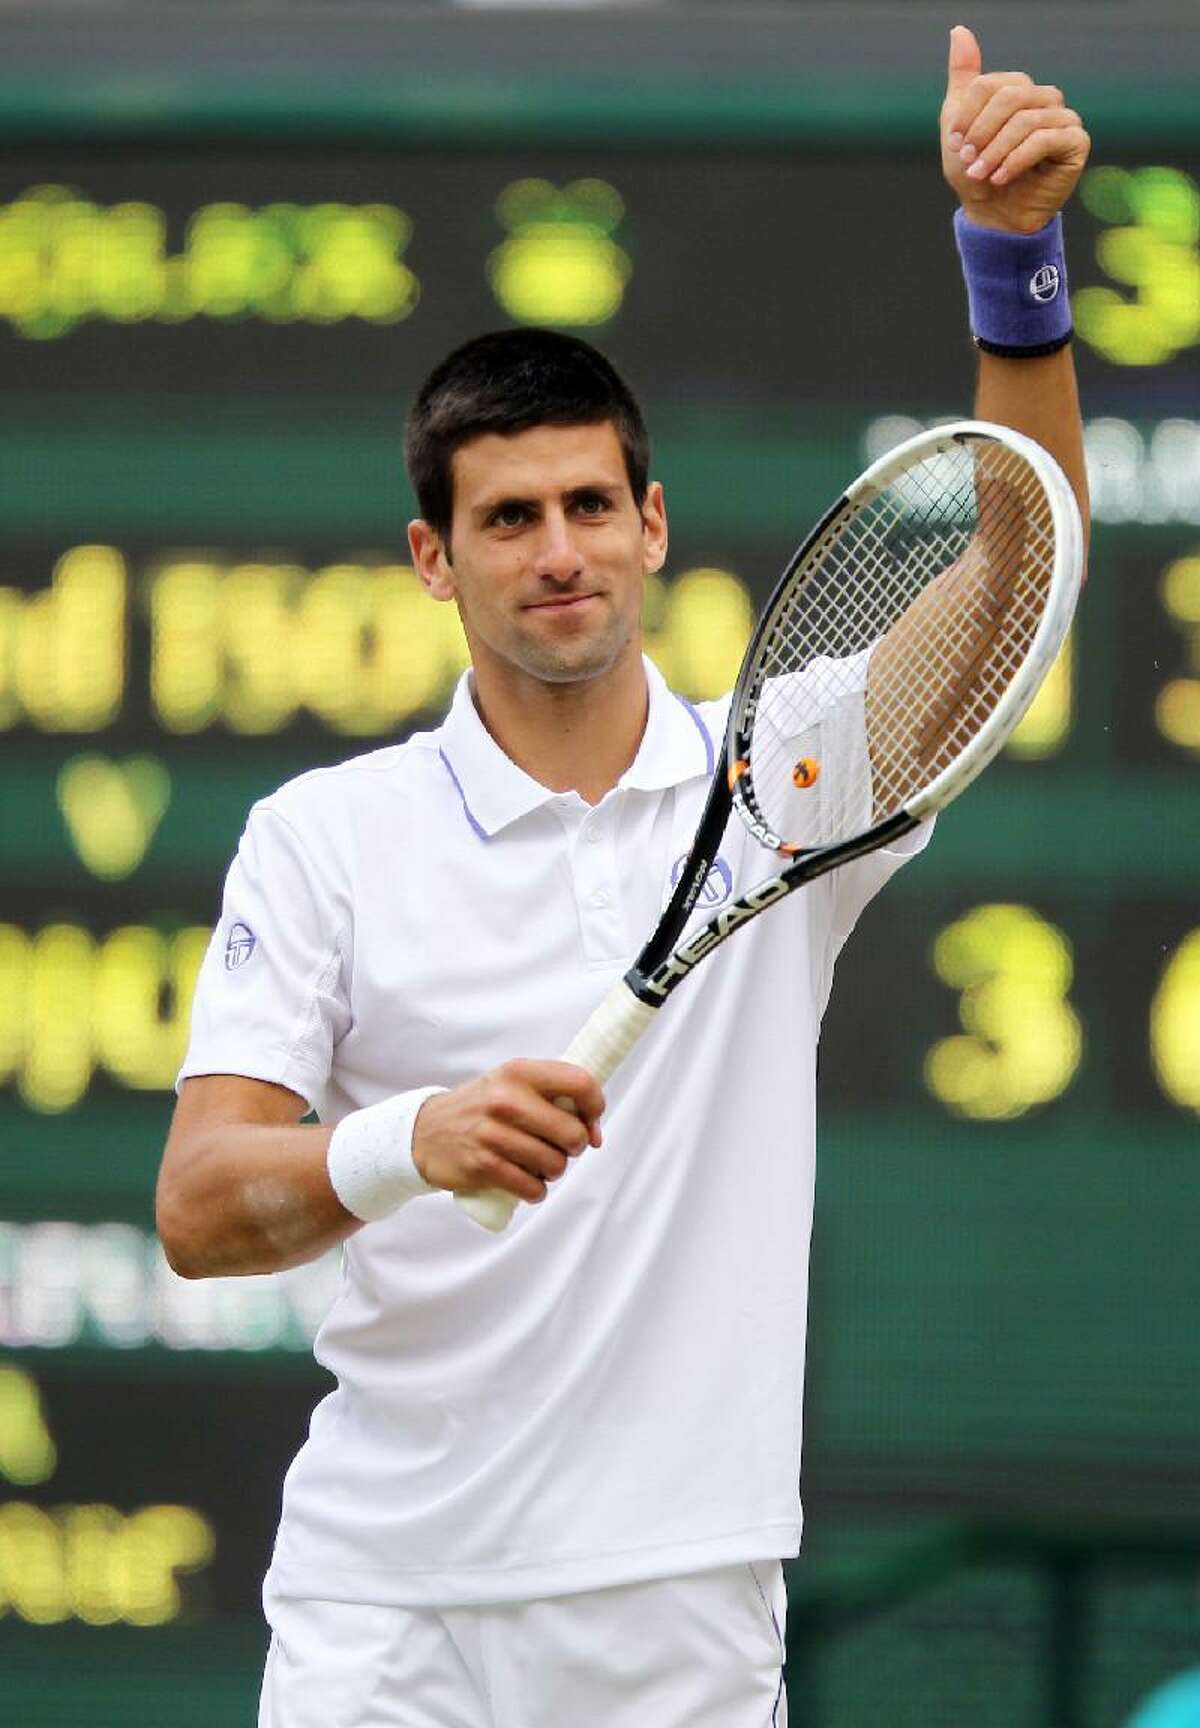 ASSOCIATED PRESS Serbia's Novak Djokovic celebrates defeating France's Jo Wilfried Tsonga on Friday at the 2011 Wimbledon Championships at the All England Lawn Tennis and Croquet Club.